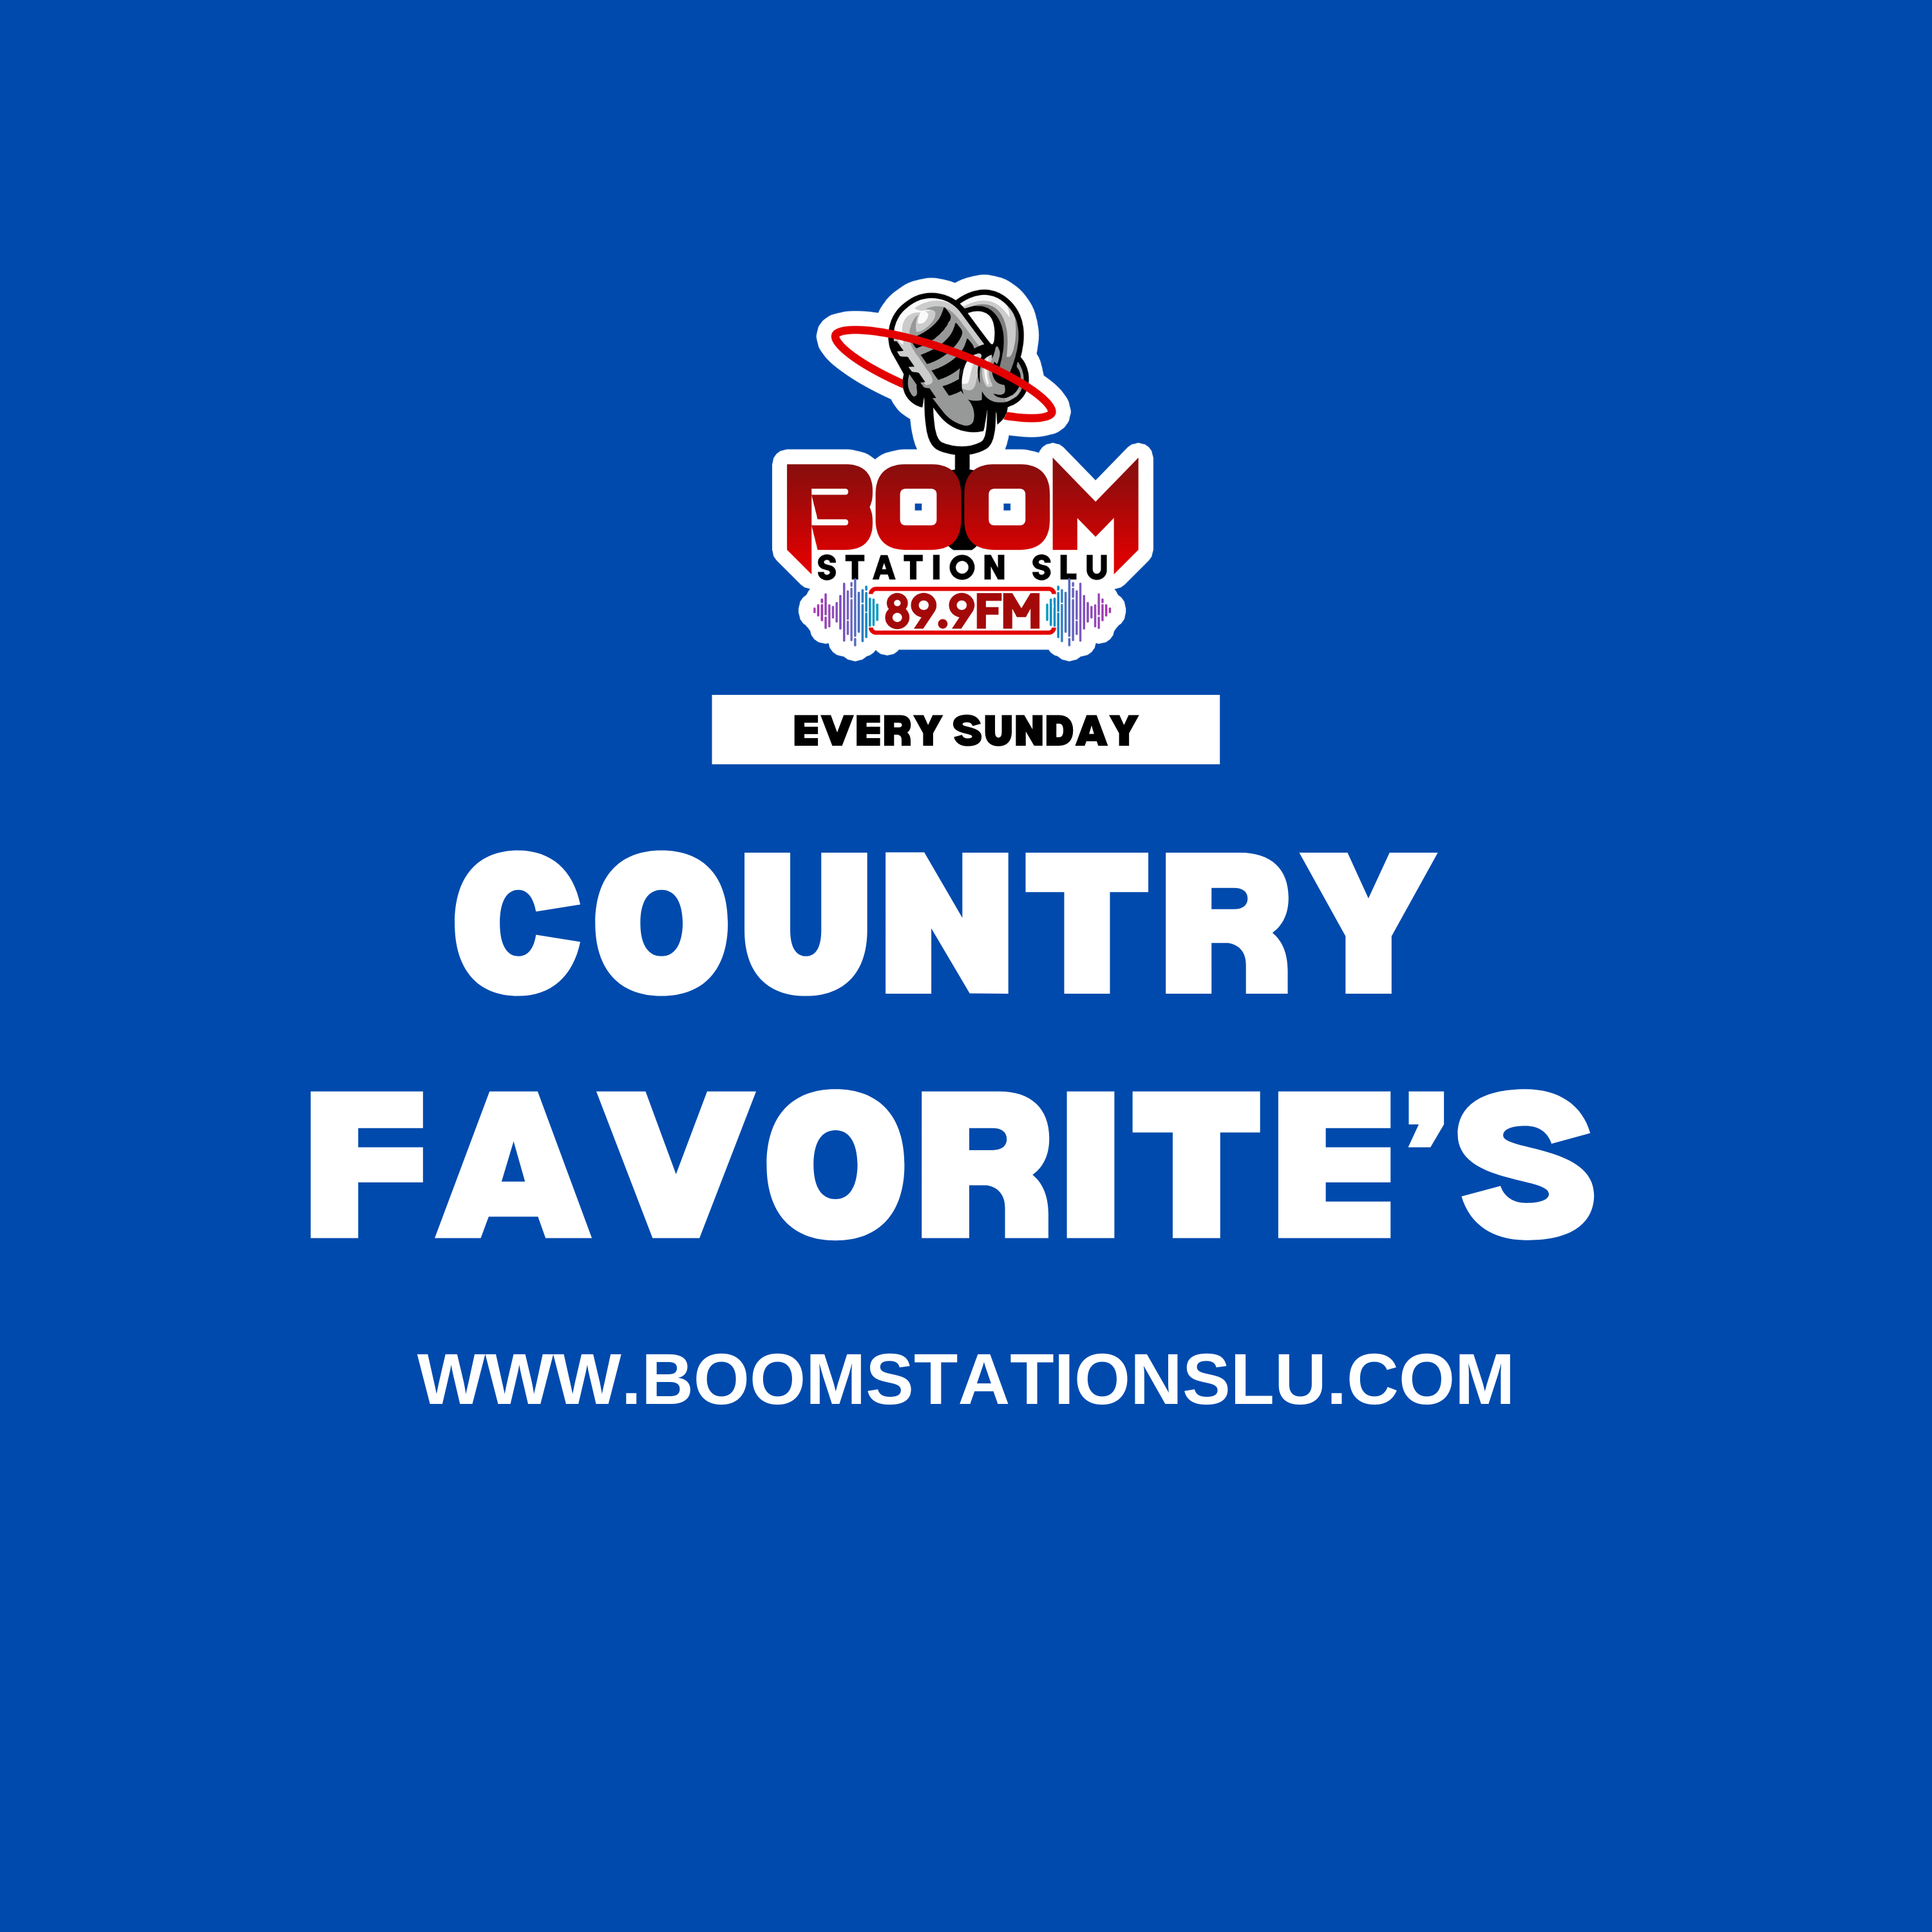 Country Favorite’s